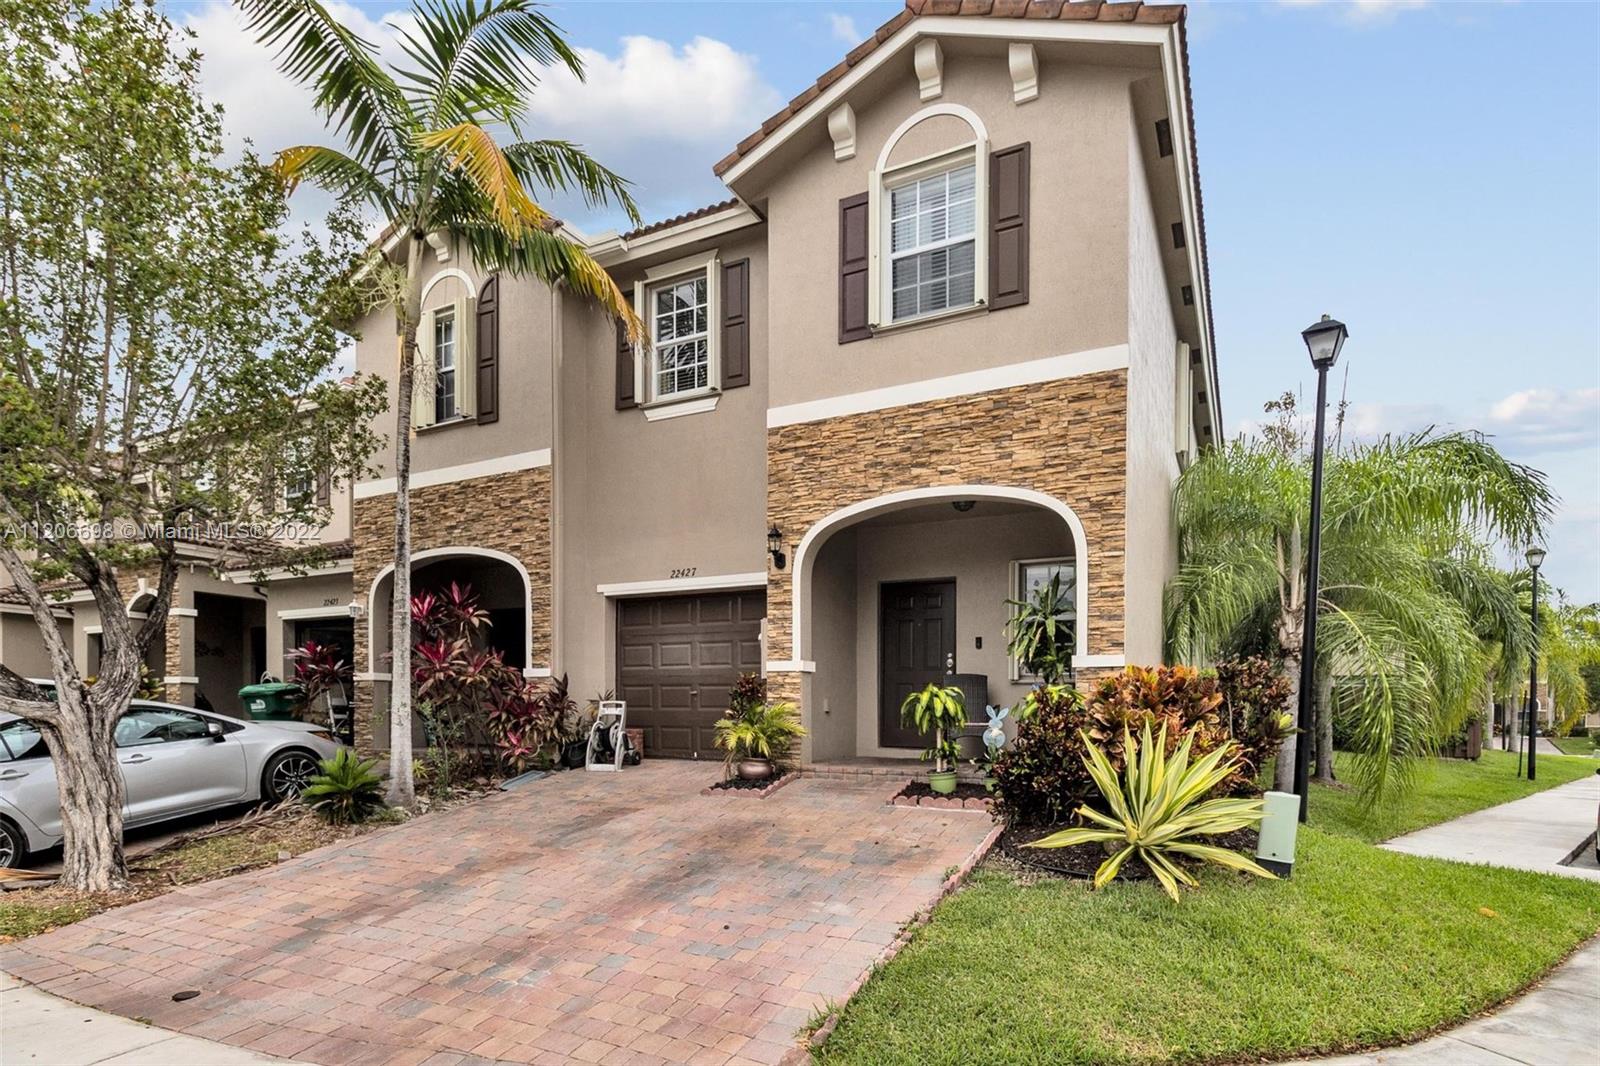 NICE AND CLEAN  TOWNHOUSE, CORNER UNIT WITH NICE PATIO AND SAFE NEIGHBORDHOOD, OWNERS ARE MOVING TO ORLANDO AND LOOKING FOR A GOOD FAMILY TO TAKE CARE HIS HOUSE. EASY TO SHOW IT. KITCHEN HAS STAINLESS STEEL APPLIANCES, CERAMIC FLOORS.